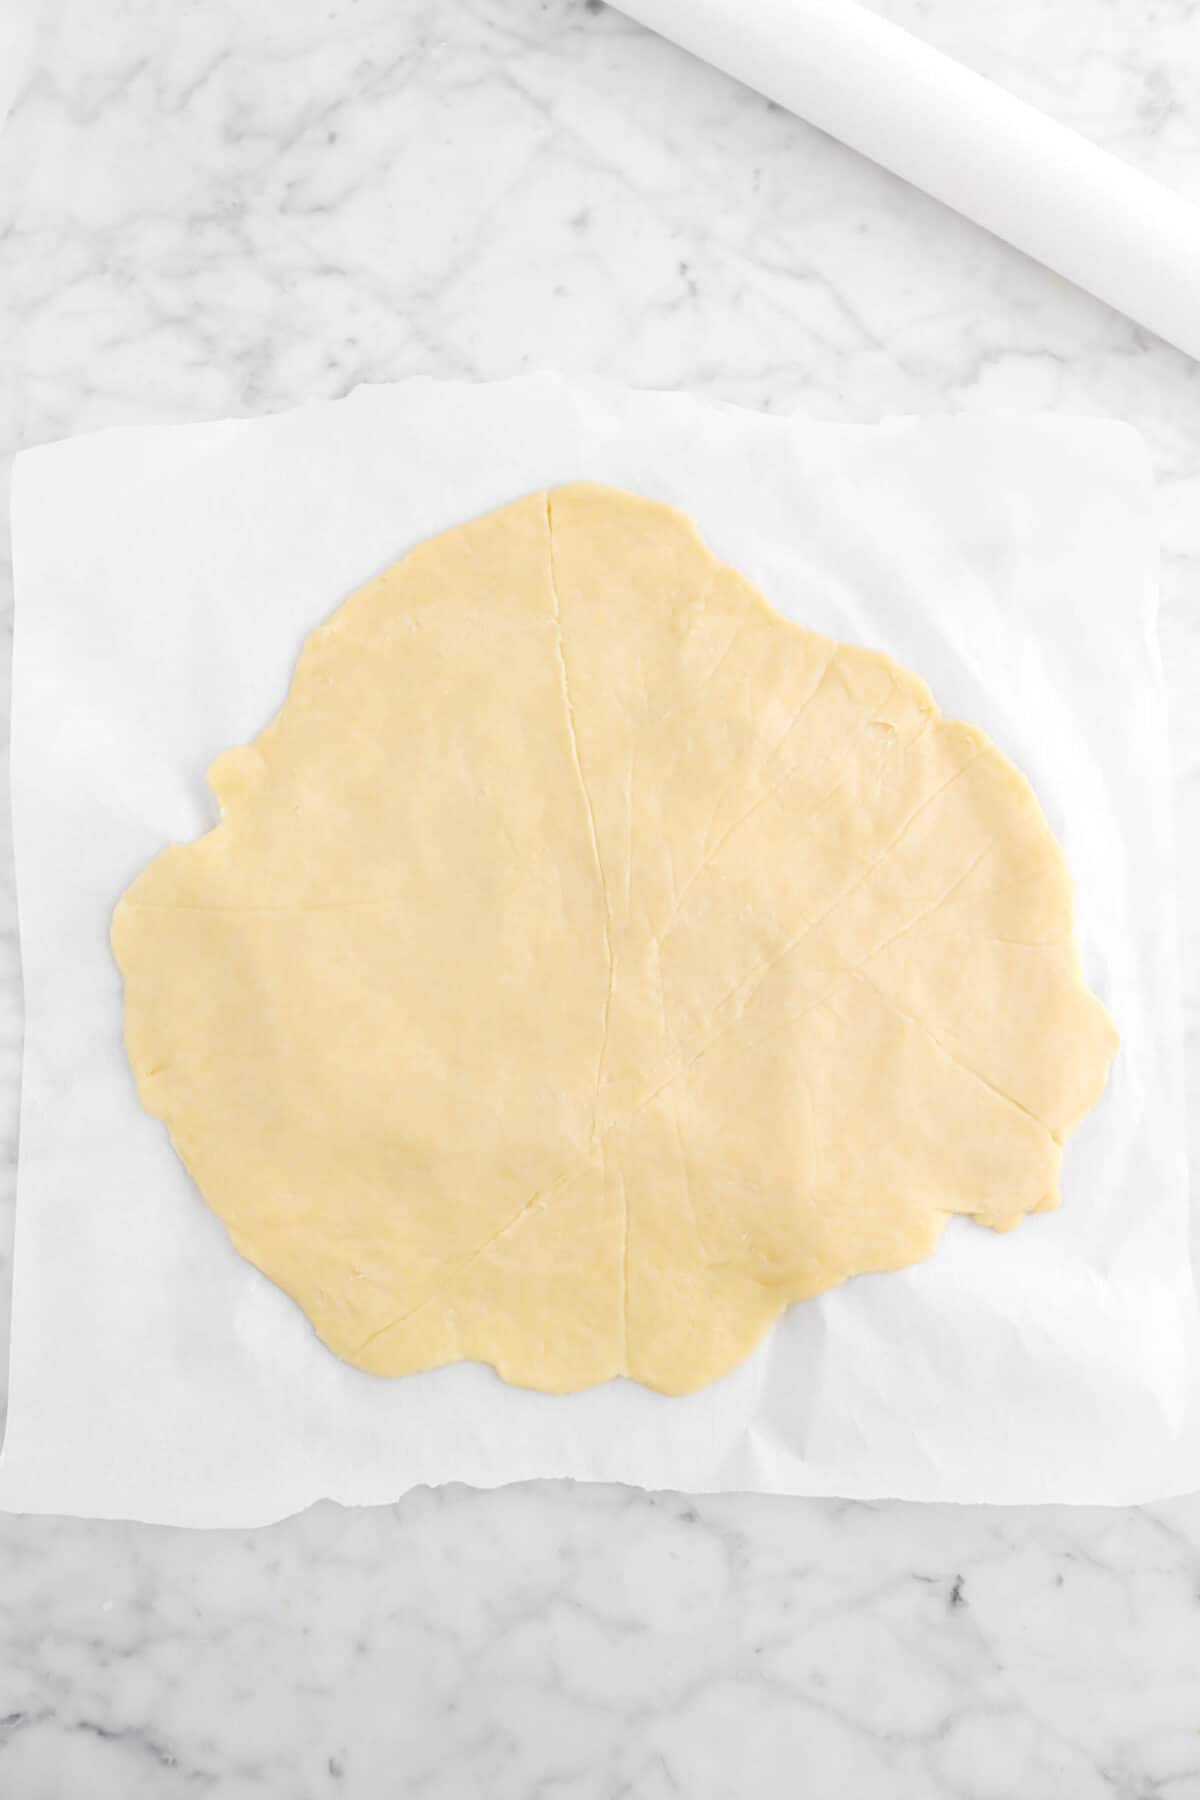 pie dough rolled out on parchment paper with white rolling pin